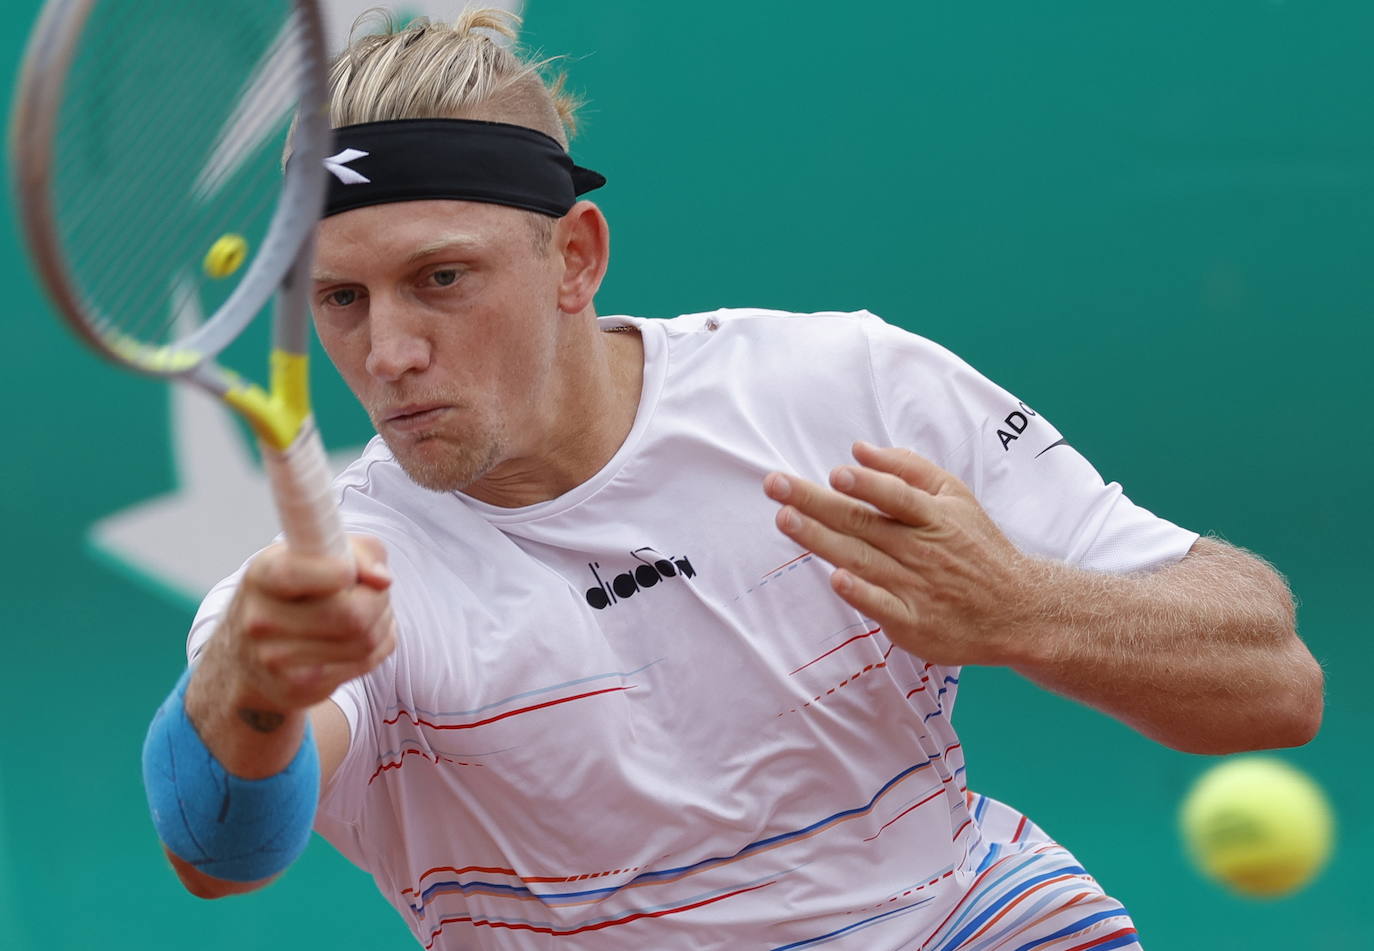 Davidovich in his match against Griekspoor at the French Open.